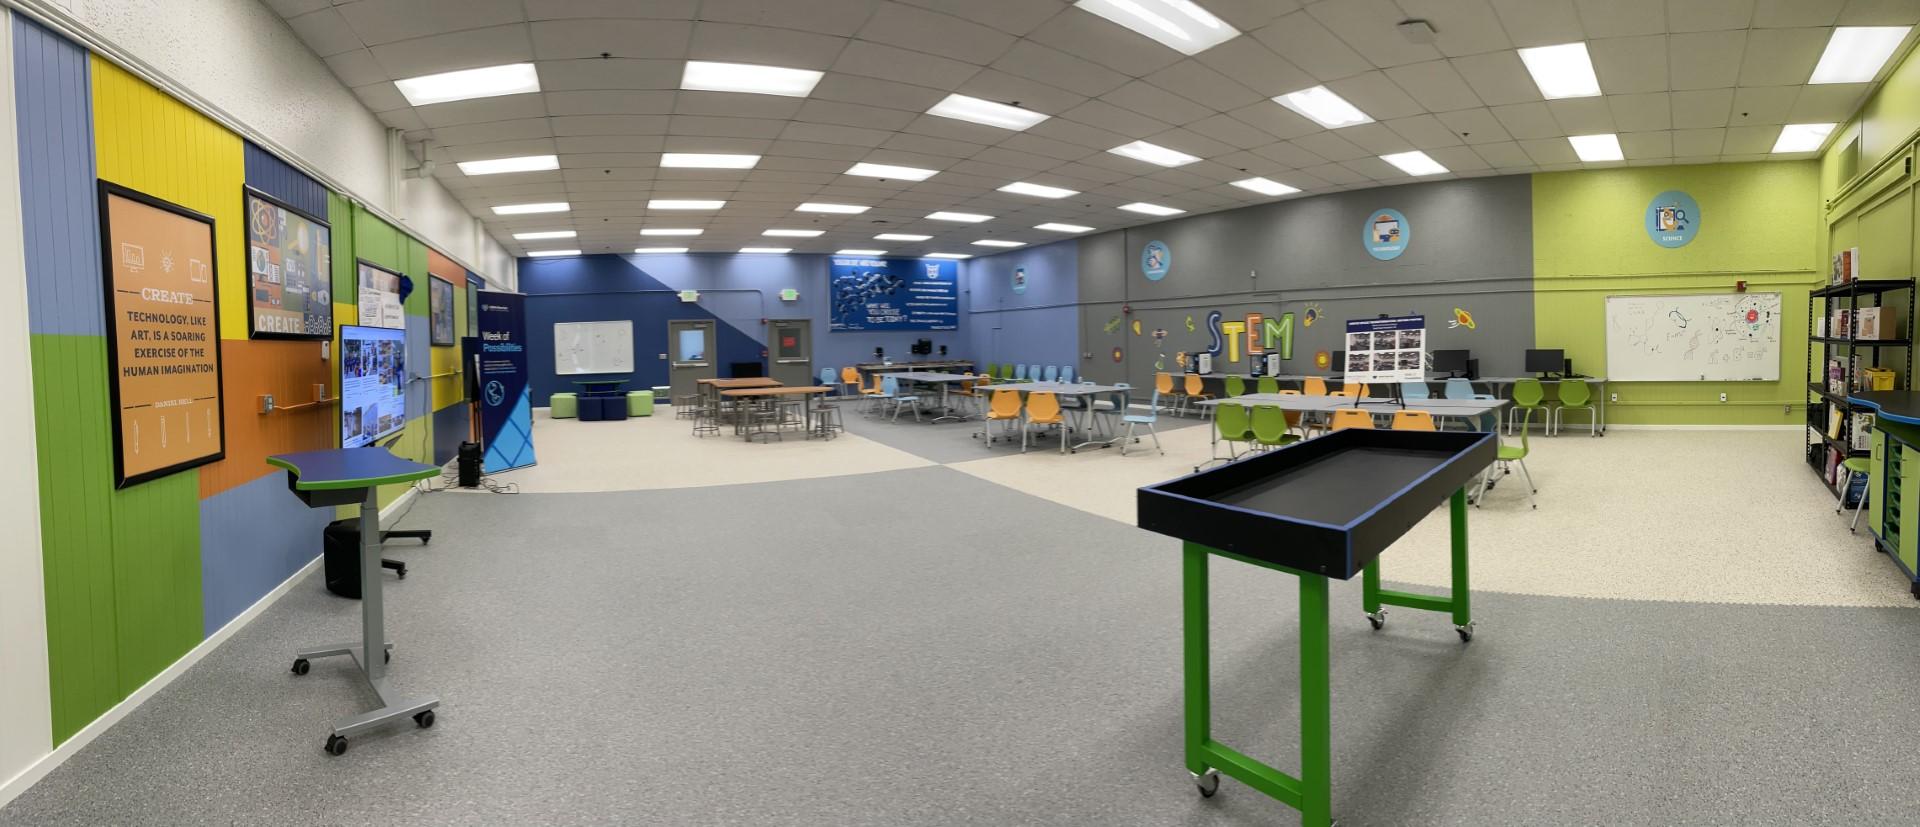 New STEM lab at Spruce Elementary (after)